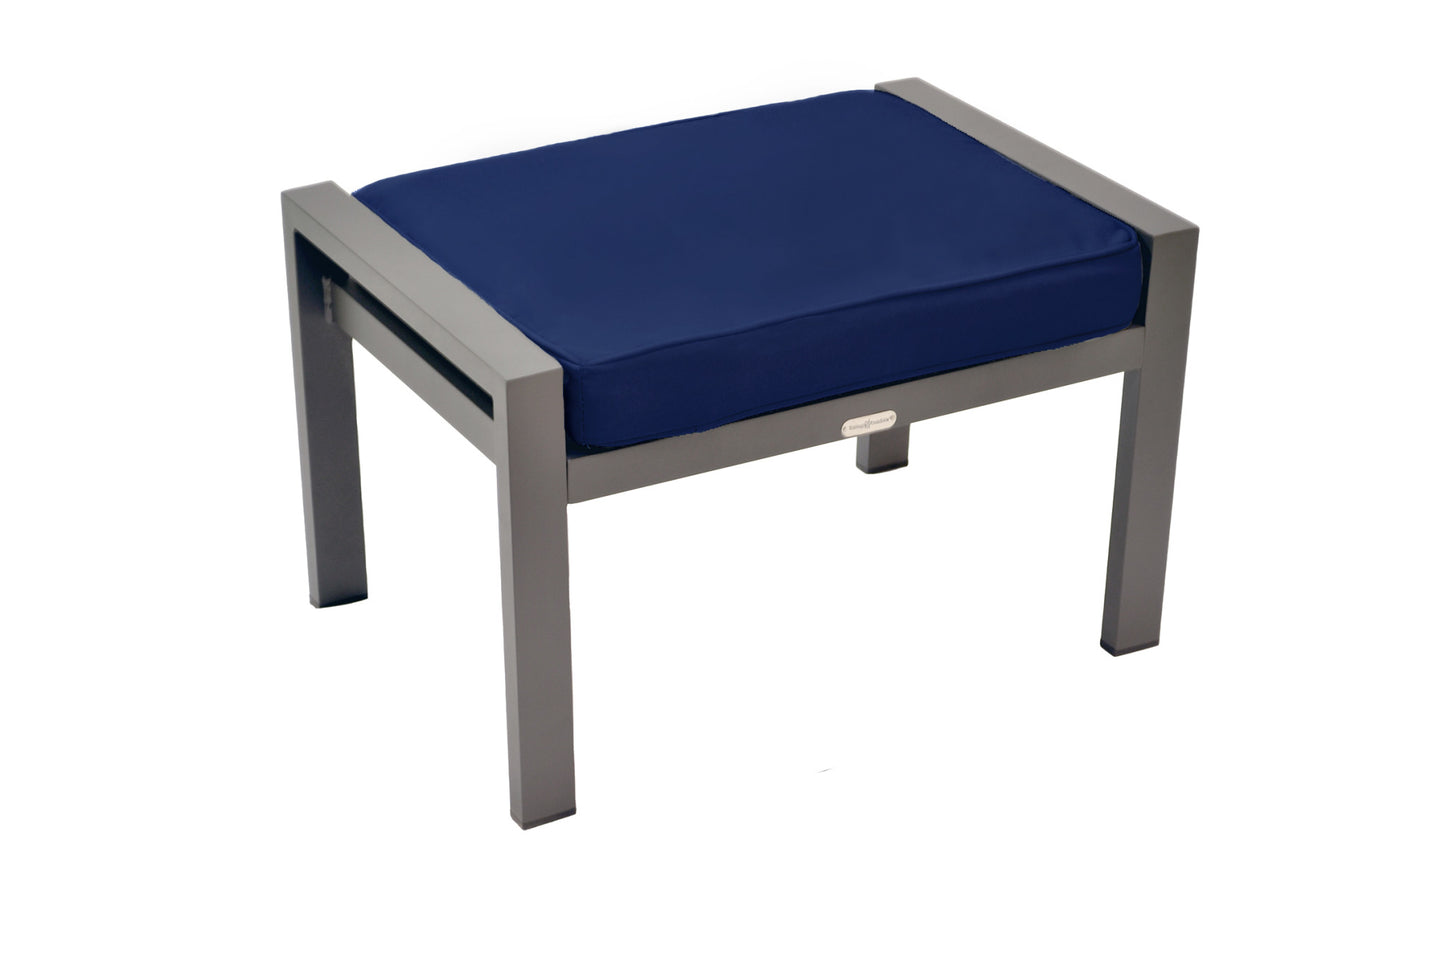 Lakeview Aluminum Chair Set (2 Chairs & 2 Ottomans) - Navy